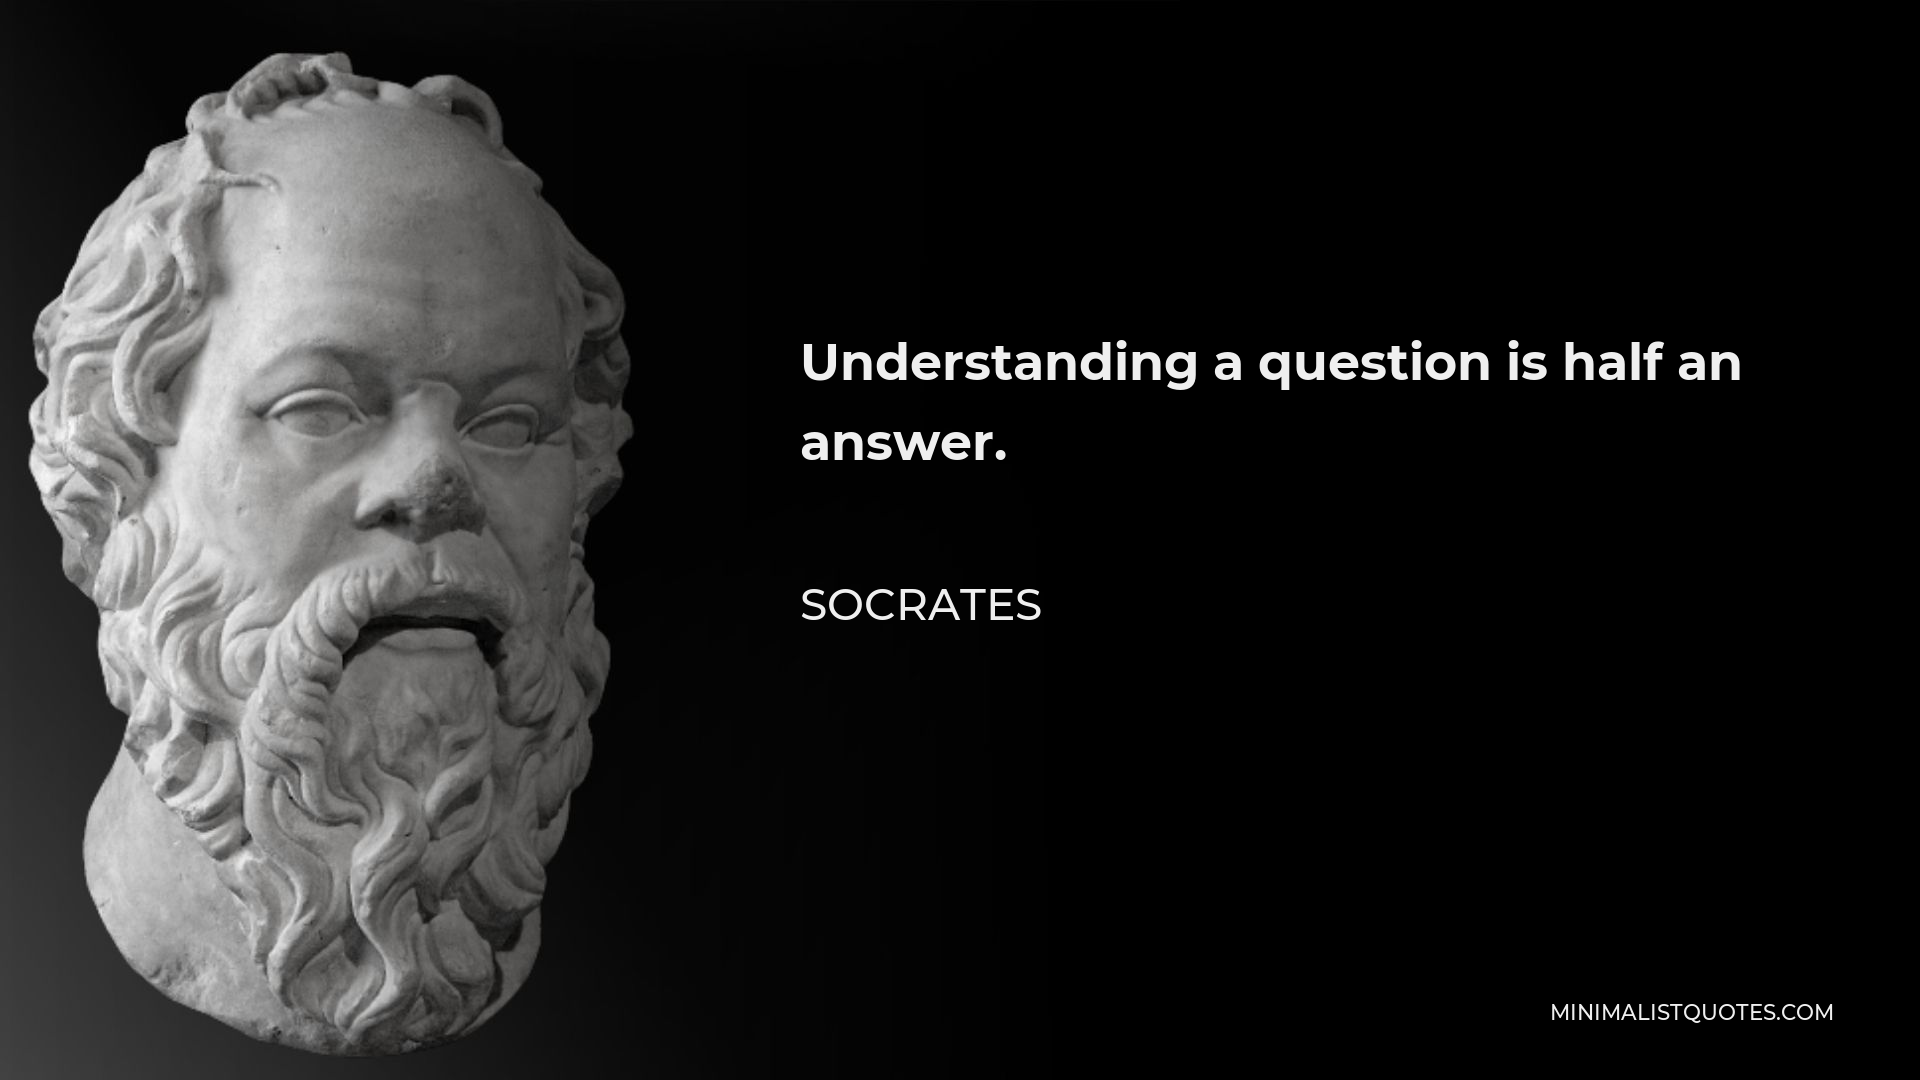 Socrates Quote - Understanding a question is half an answer.